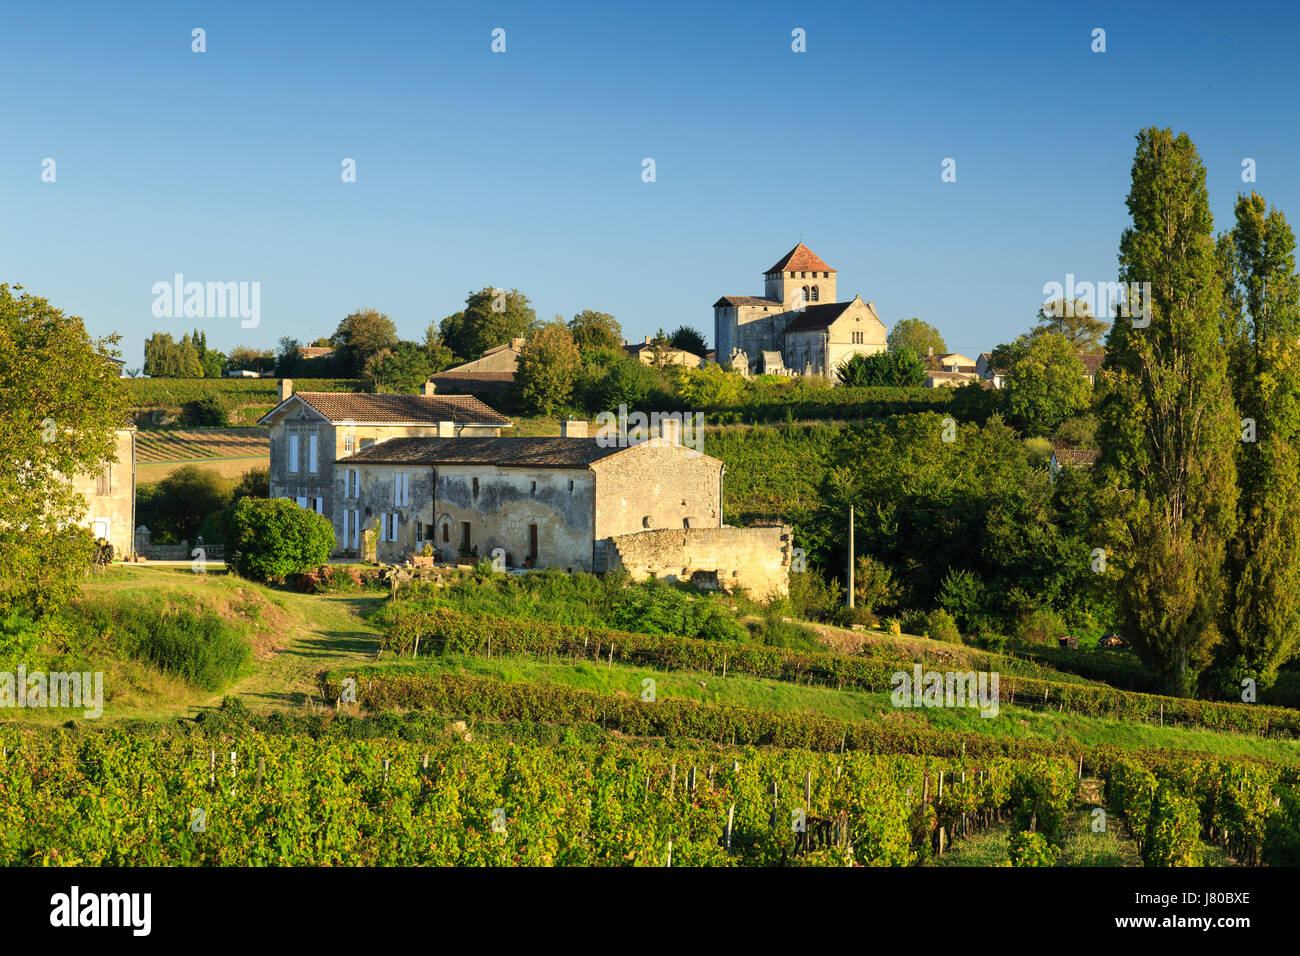 France, Gironde, Montagne, the village and the vineyard appellation Montagne Saint-Emilion, foreground Château Paradis vineyard and house Stock Photo